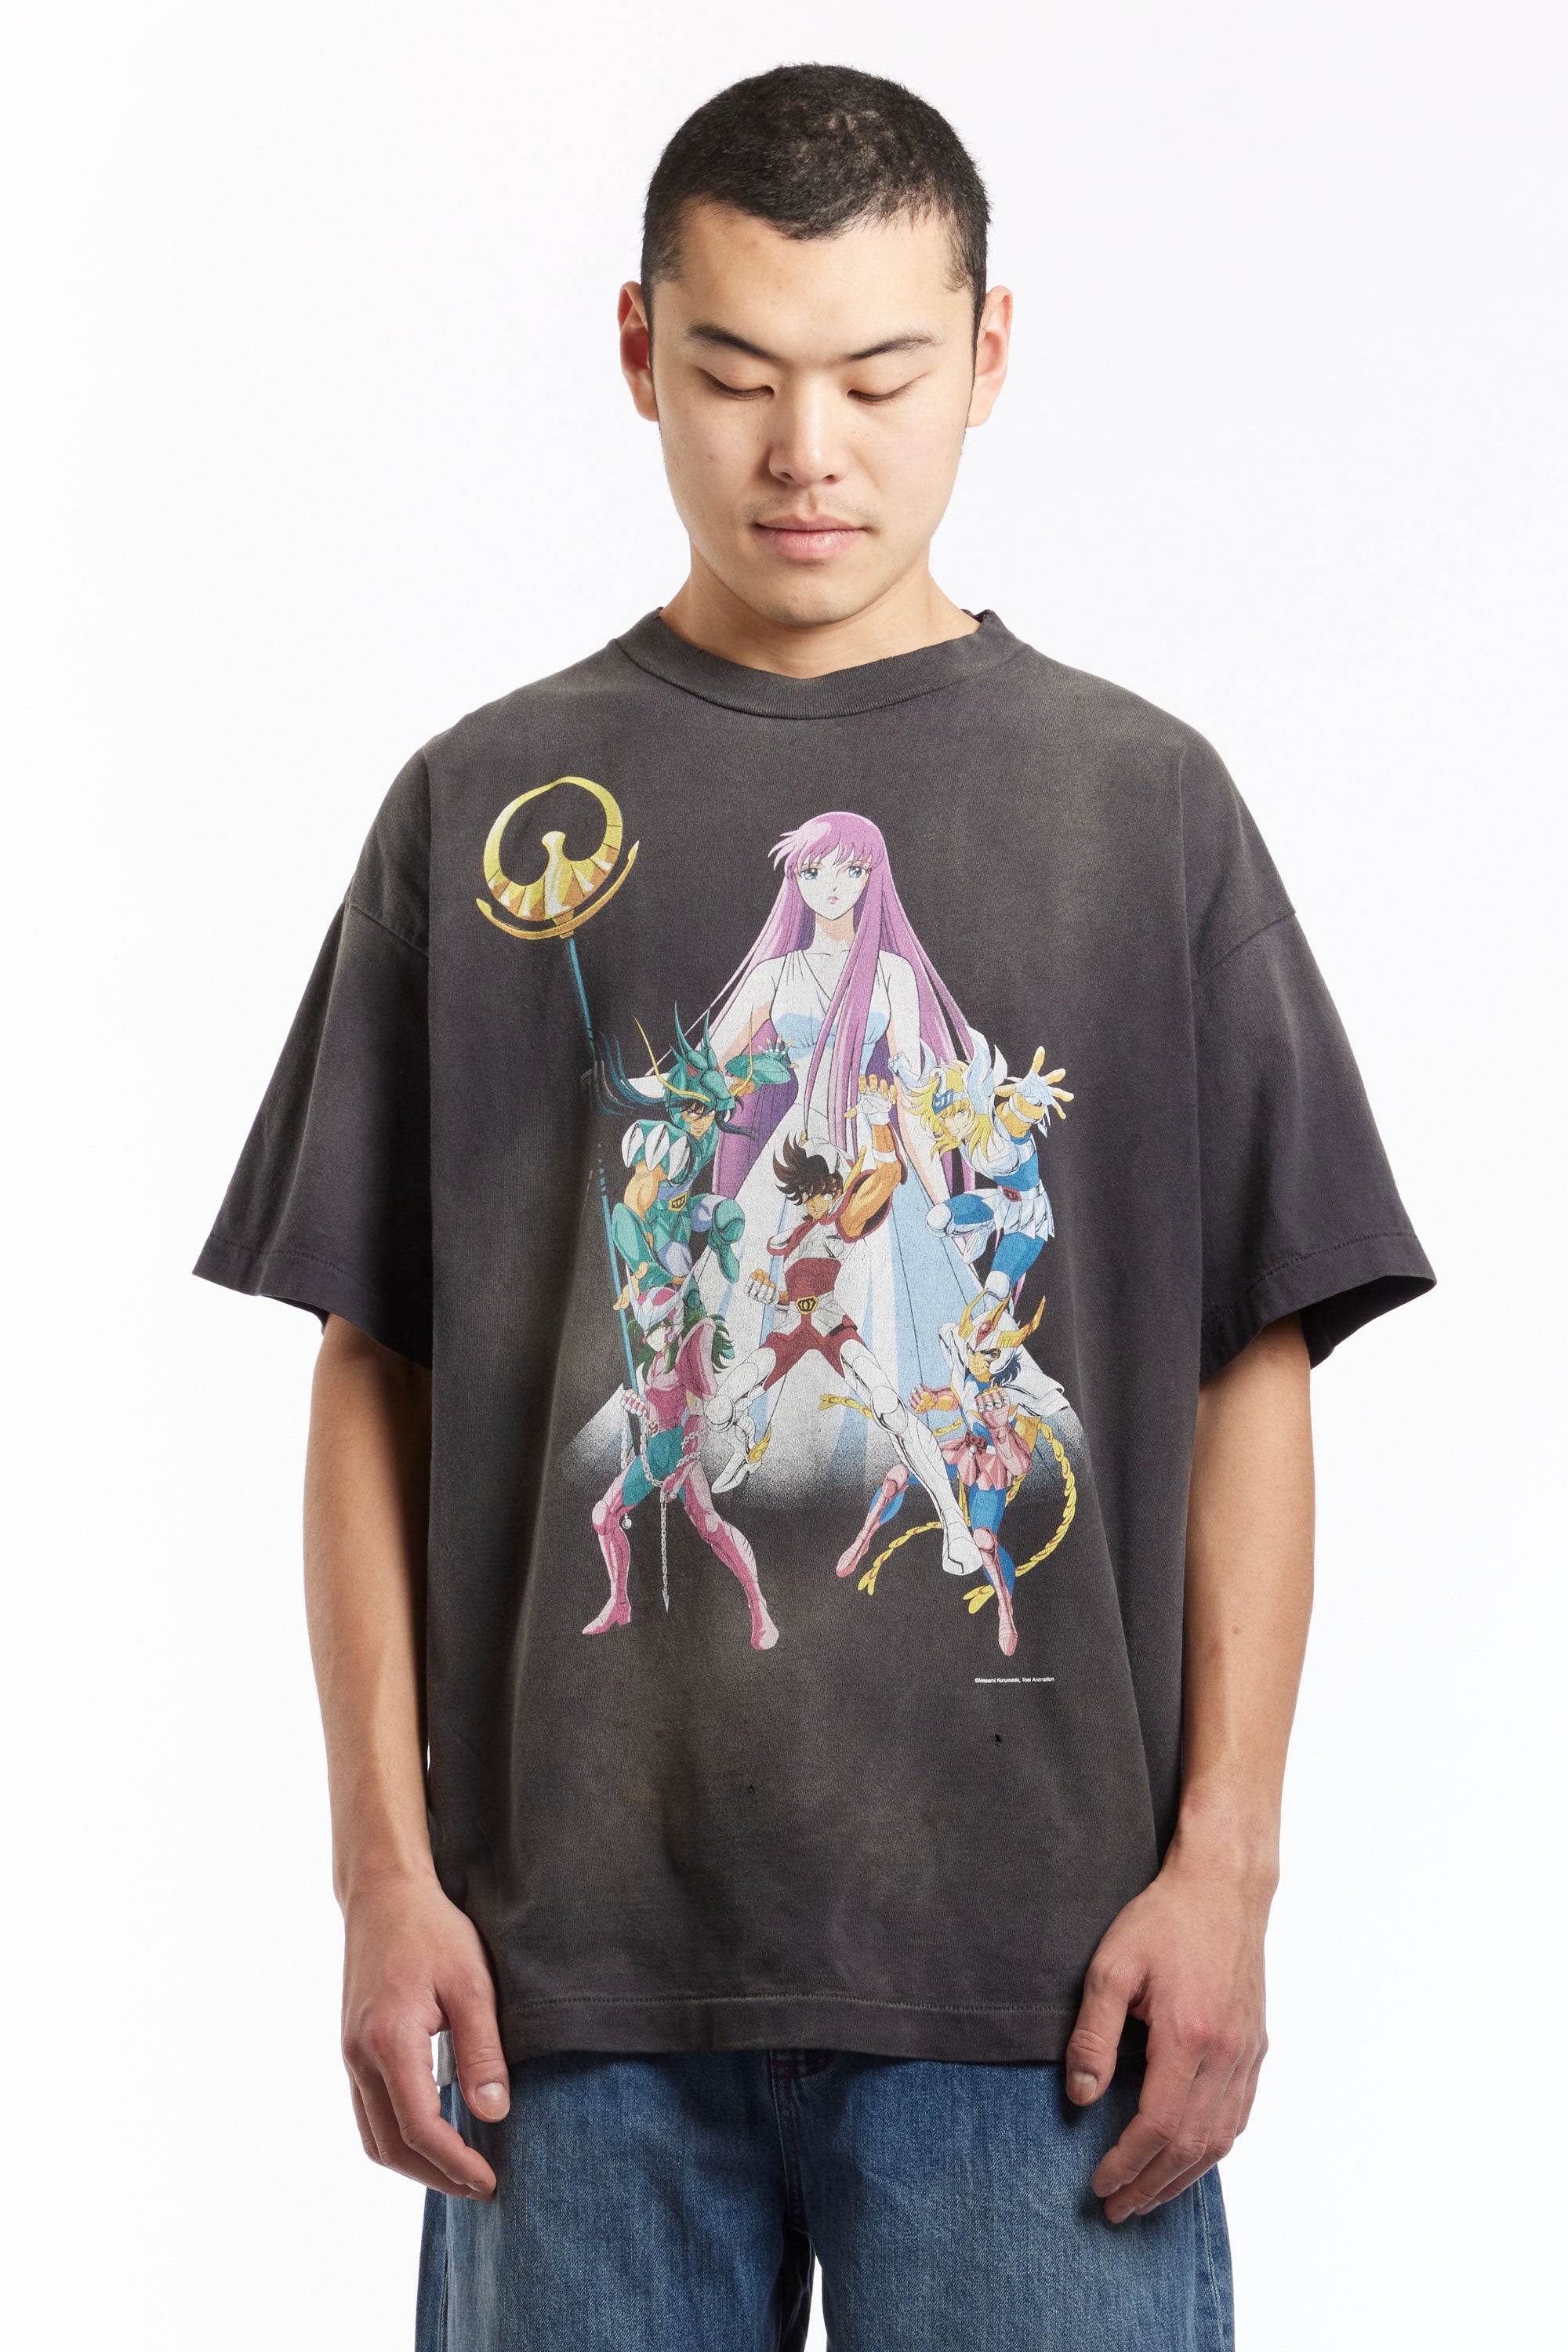 The ST MXXXXXX - SAINT SEIYA MU SS TEE  available online with global shipping, and in PAM Stores Melbourne and Sydney.